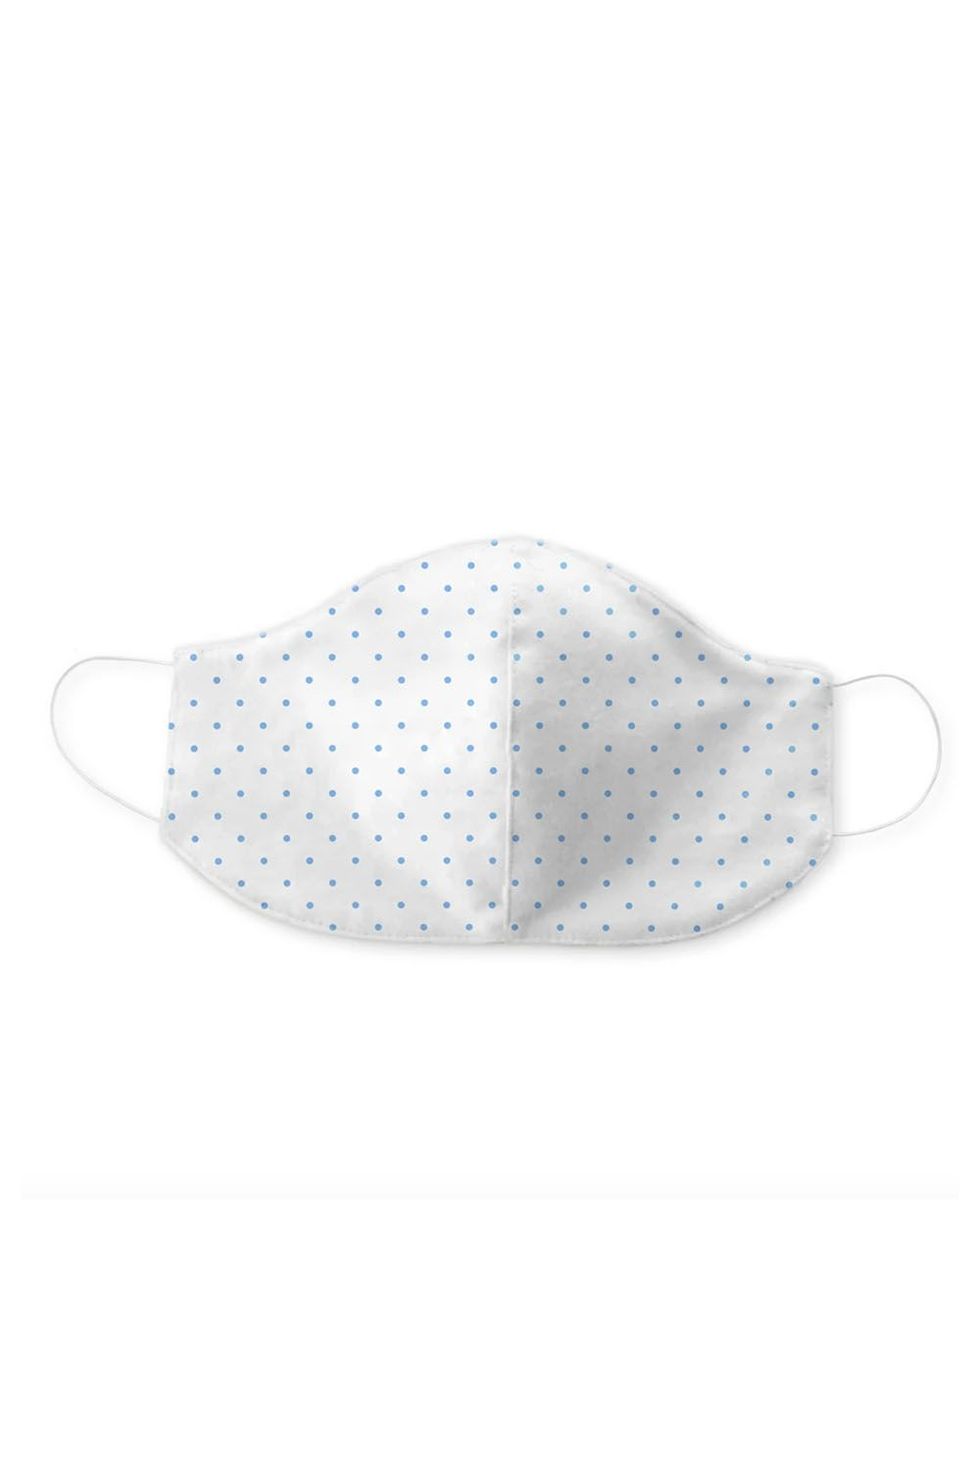 2-Layer Cotton Fabric Face Mask